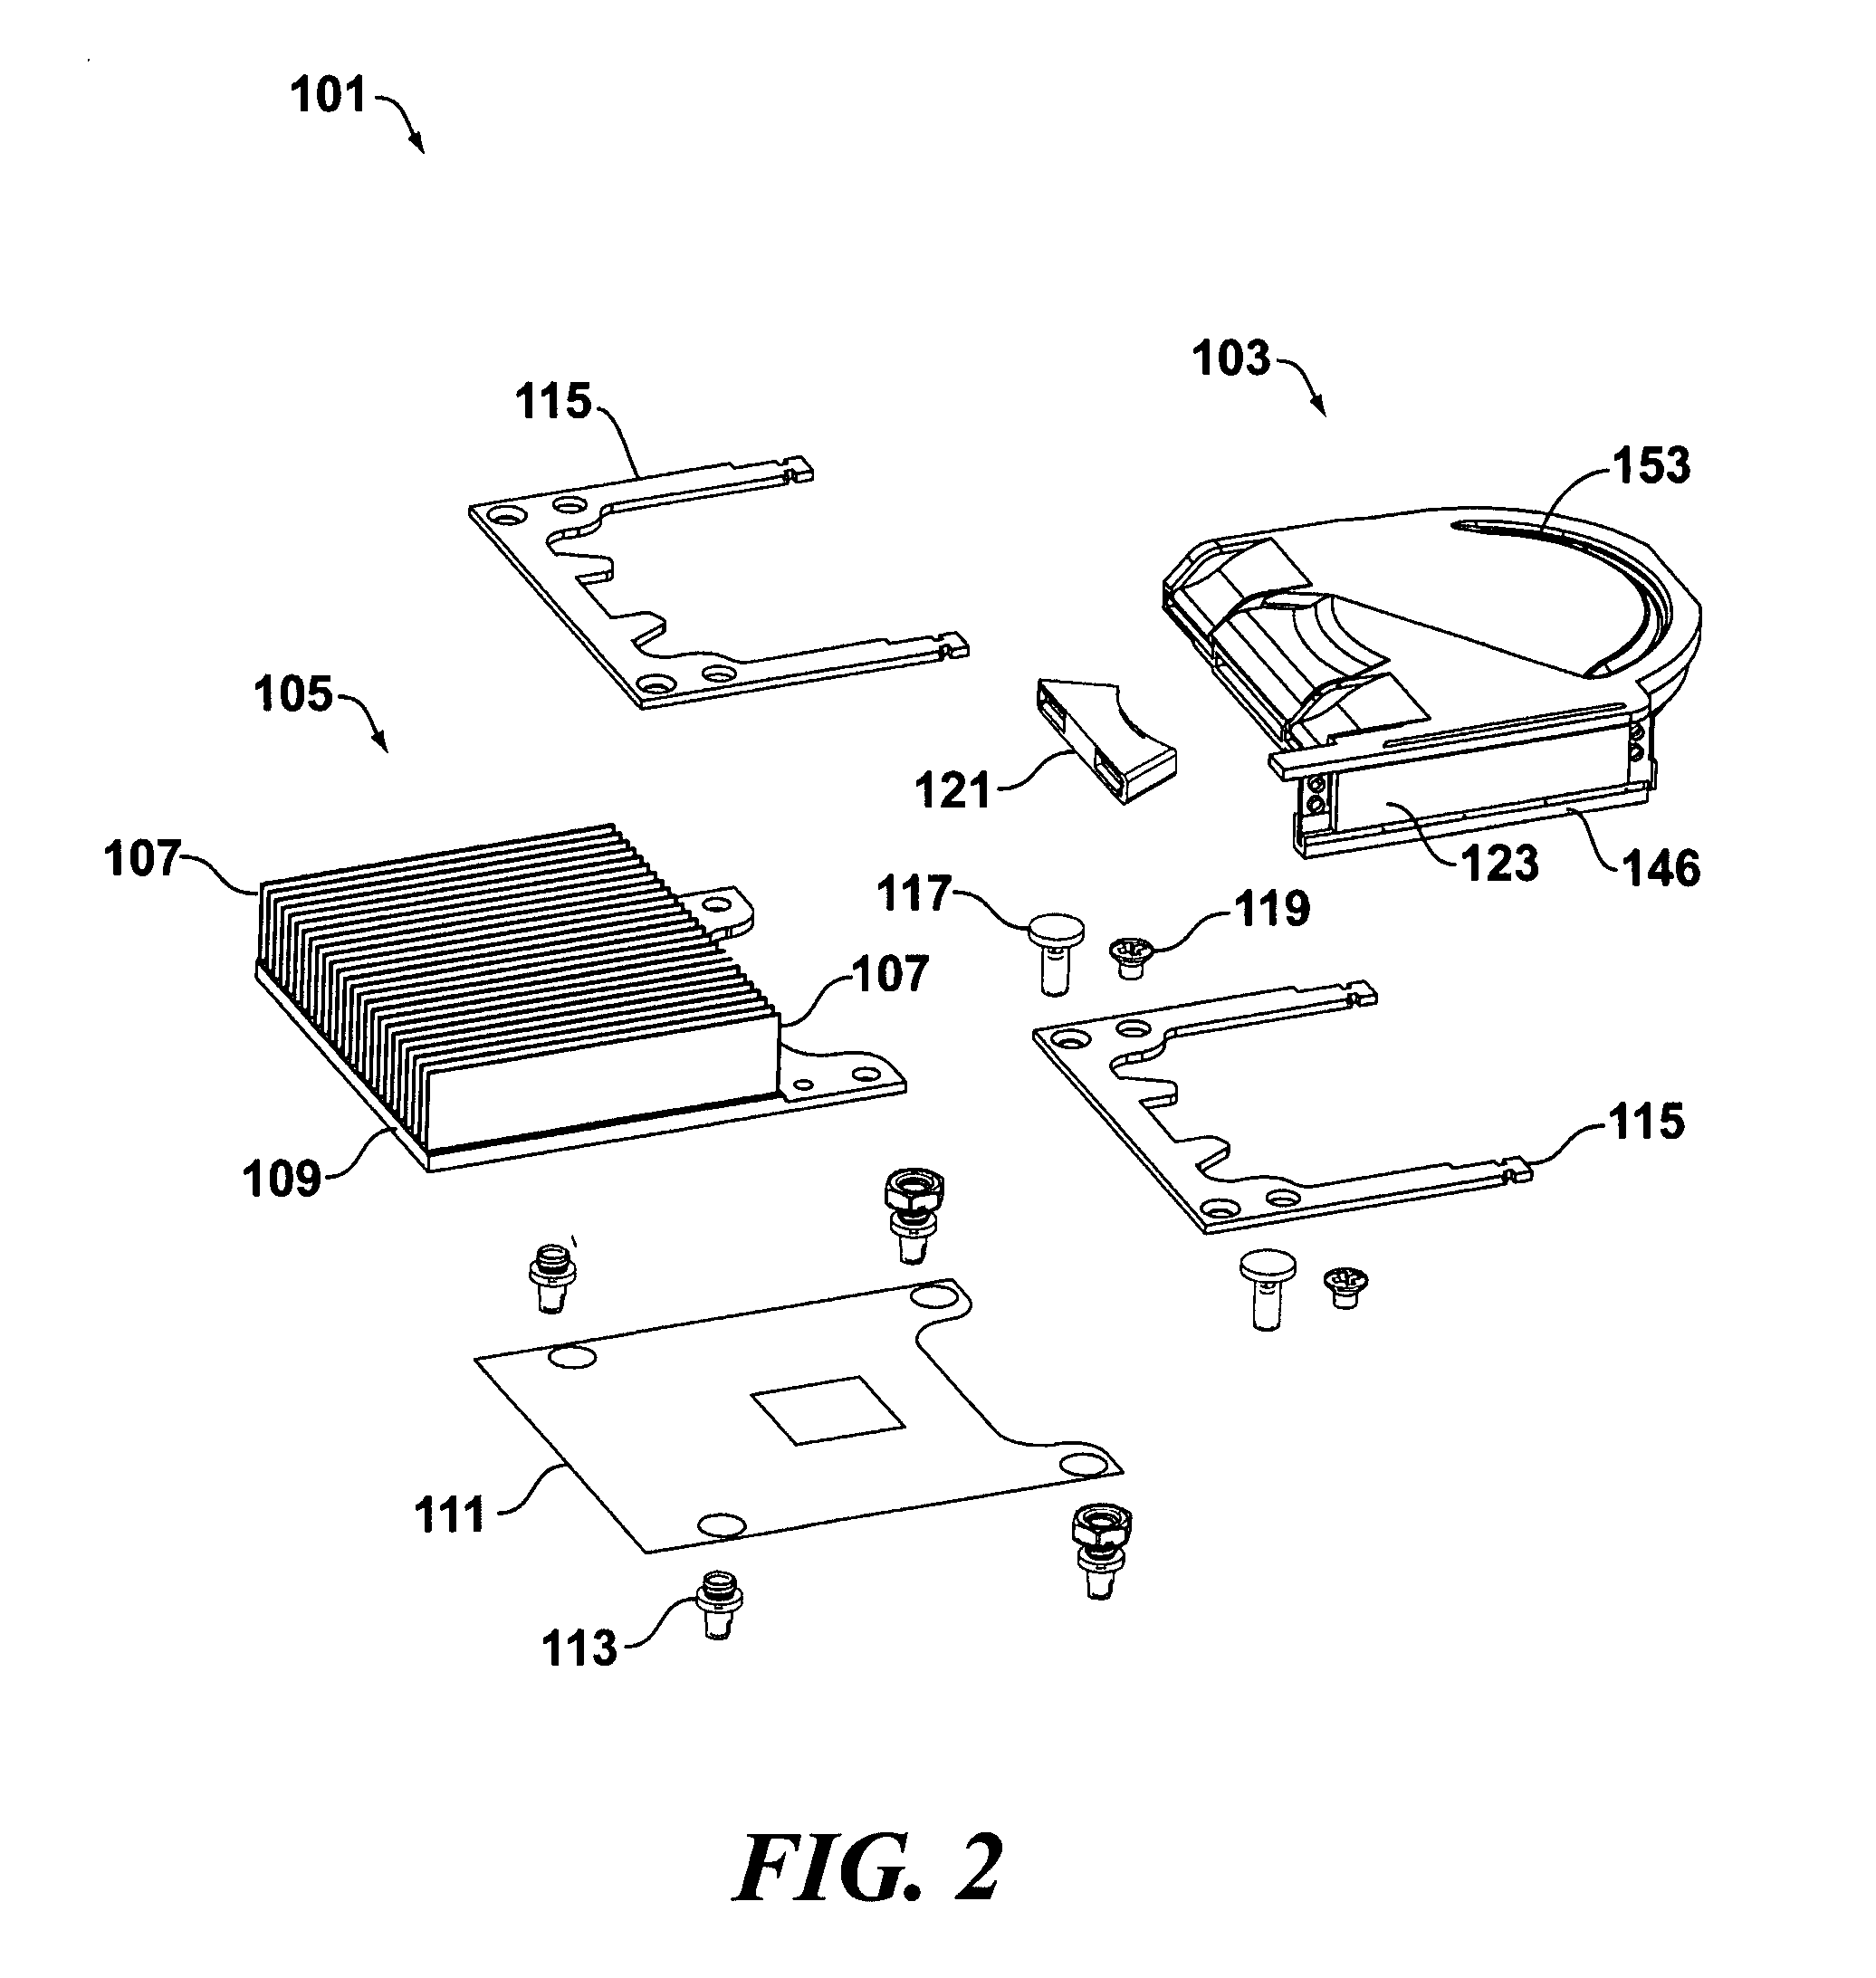 Moldable housing design for synthetic jet ejector